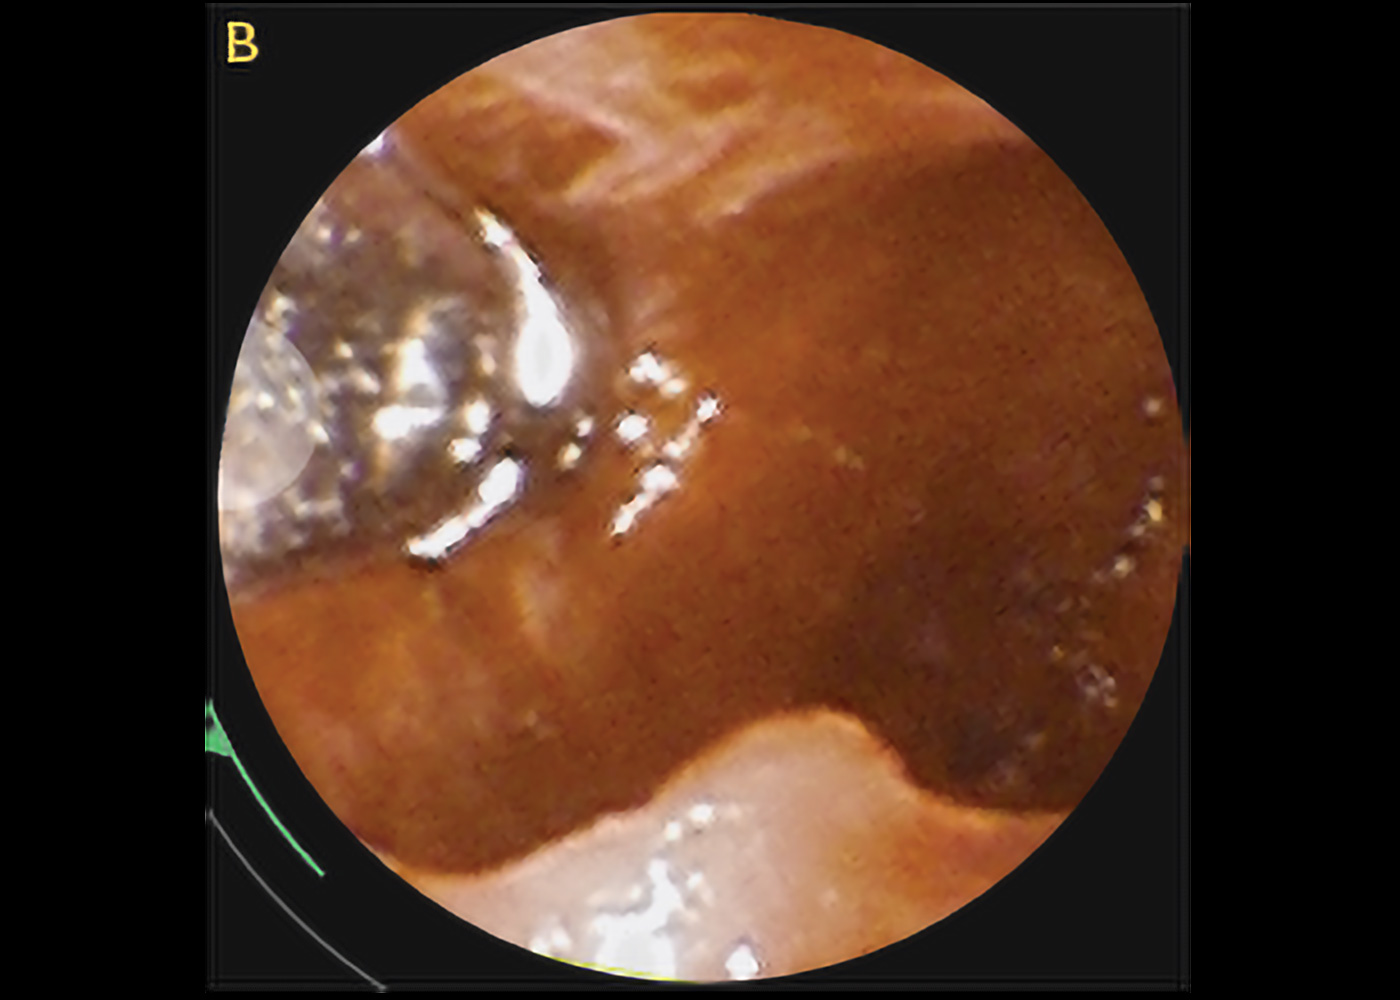 Fig 3. Direct bronchoscopic image of the forceps within the cavitary left upper lobe nodule